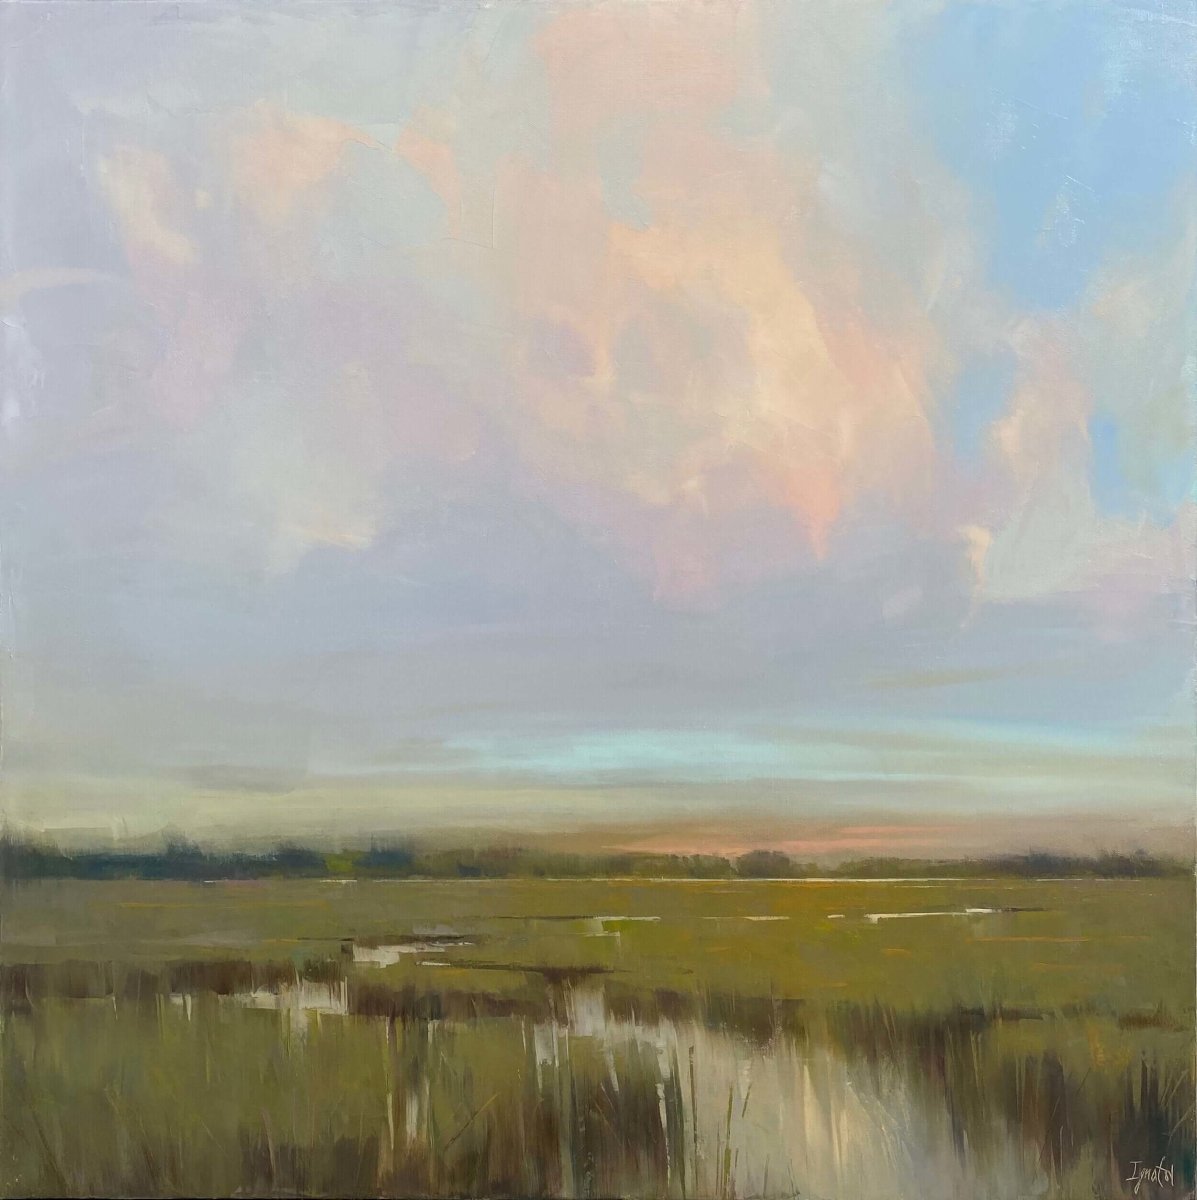 Lowcountry Afternoon by Ignat Ignatov at LePrince Galleries